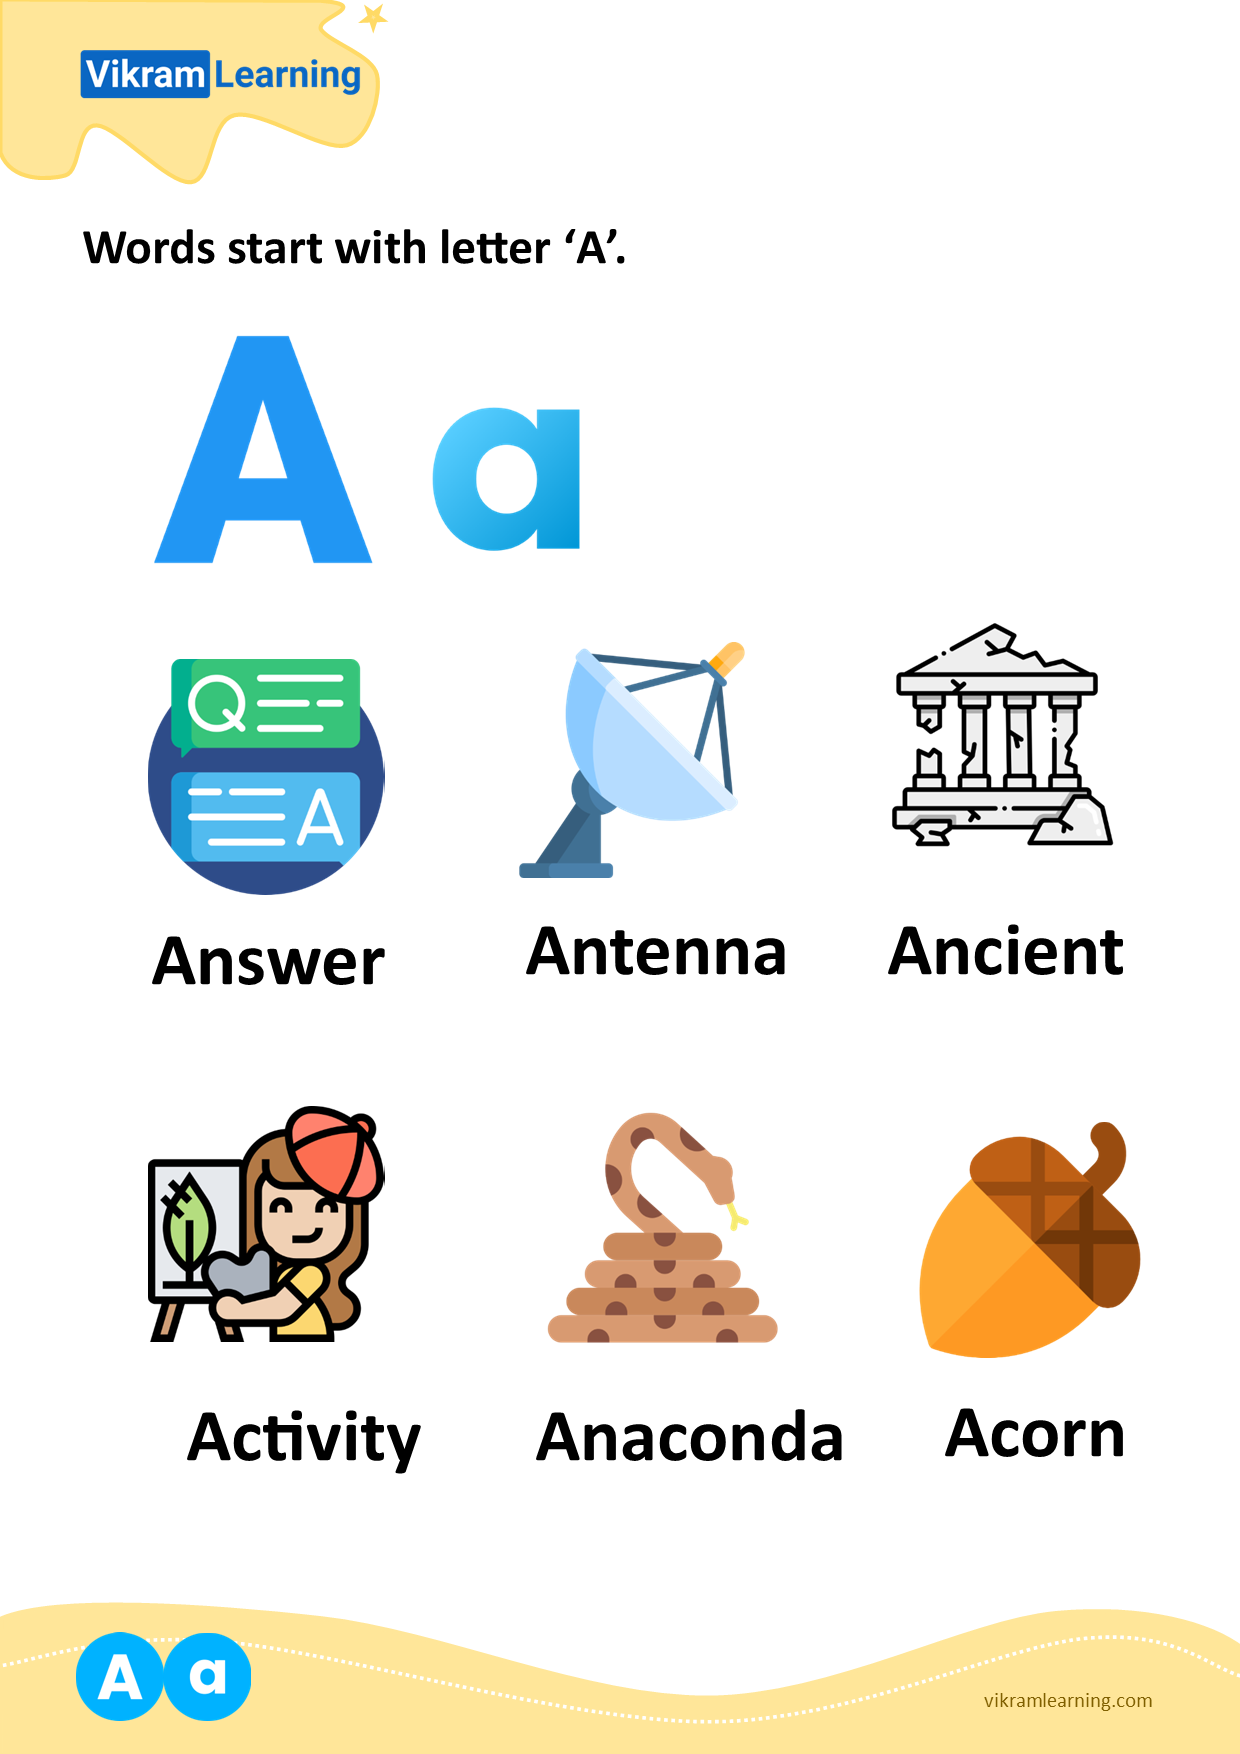 Download words start with letter 'a' worksheets